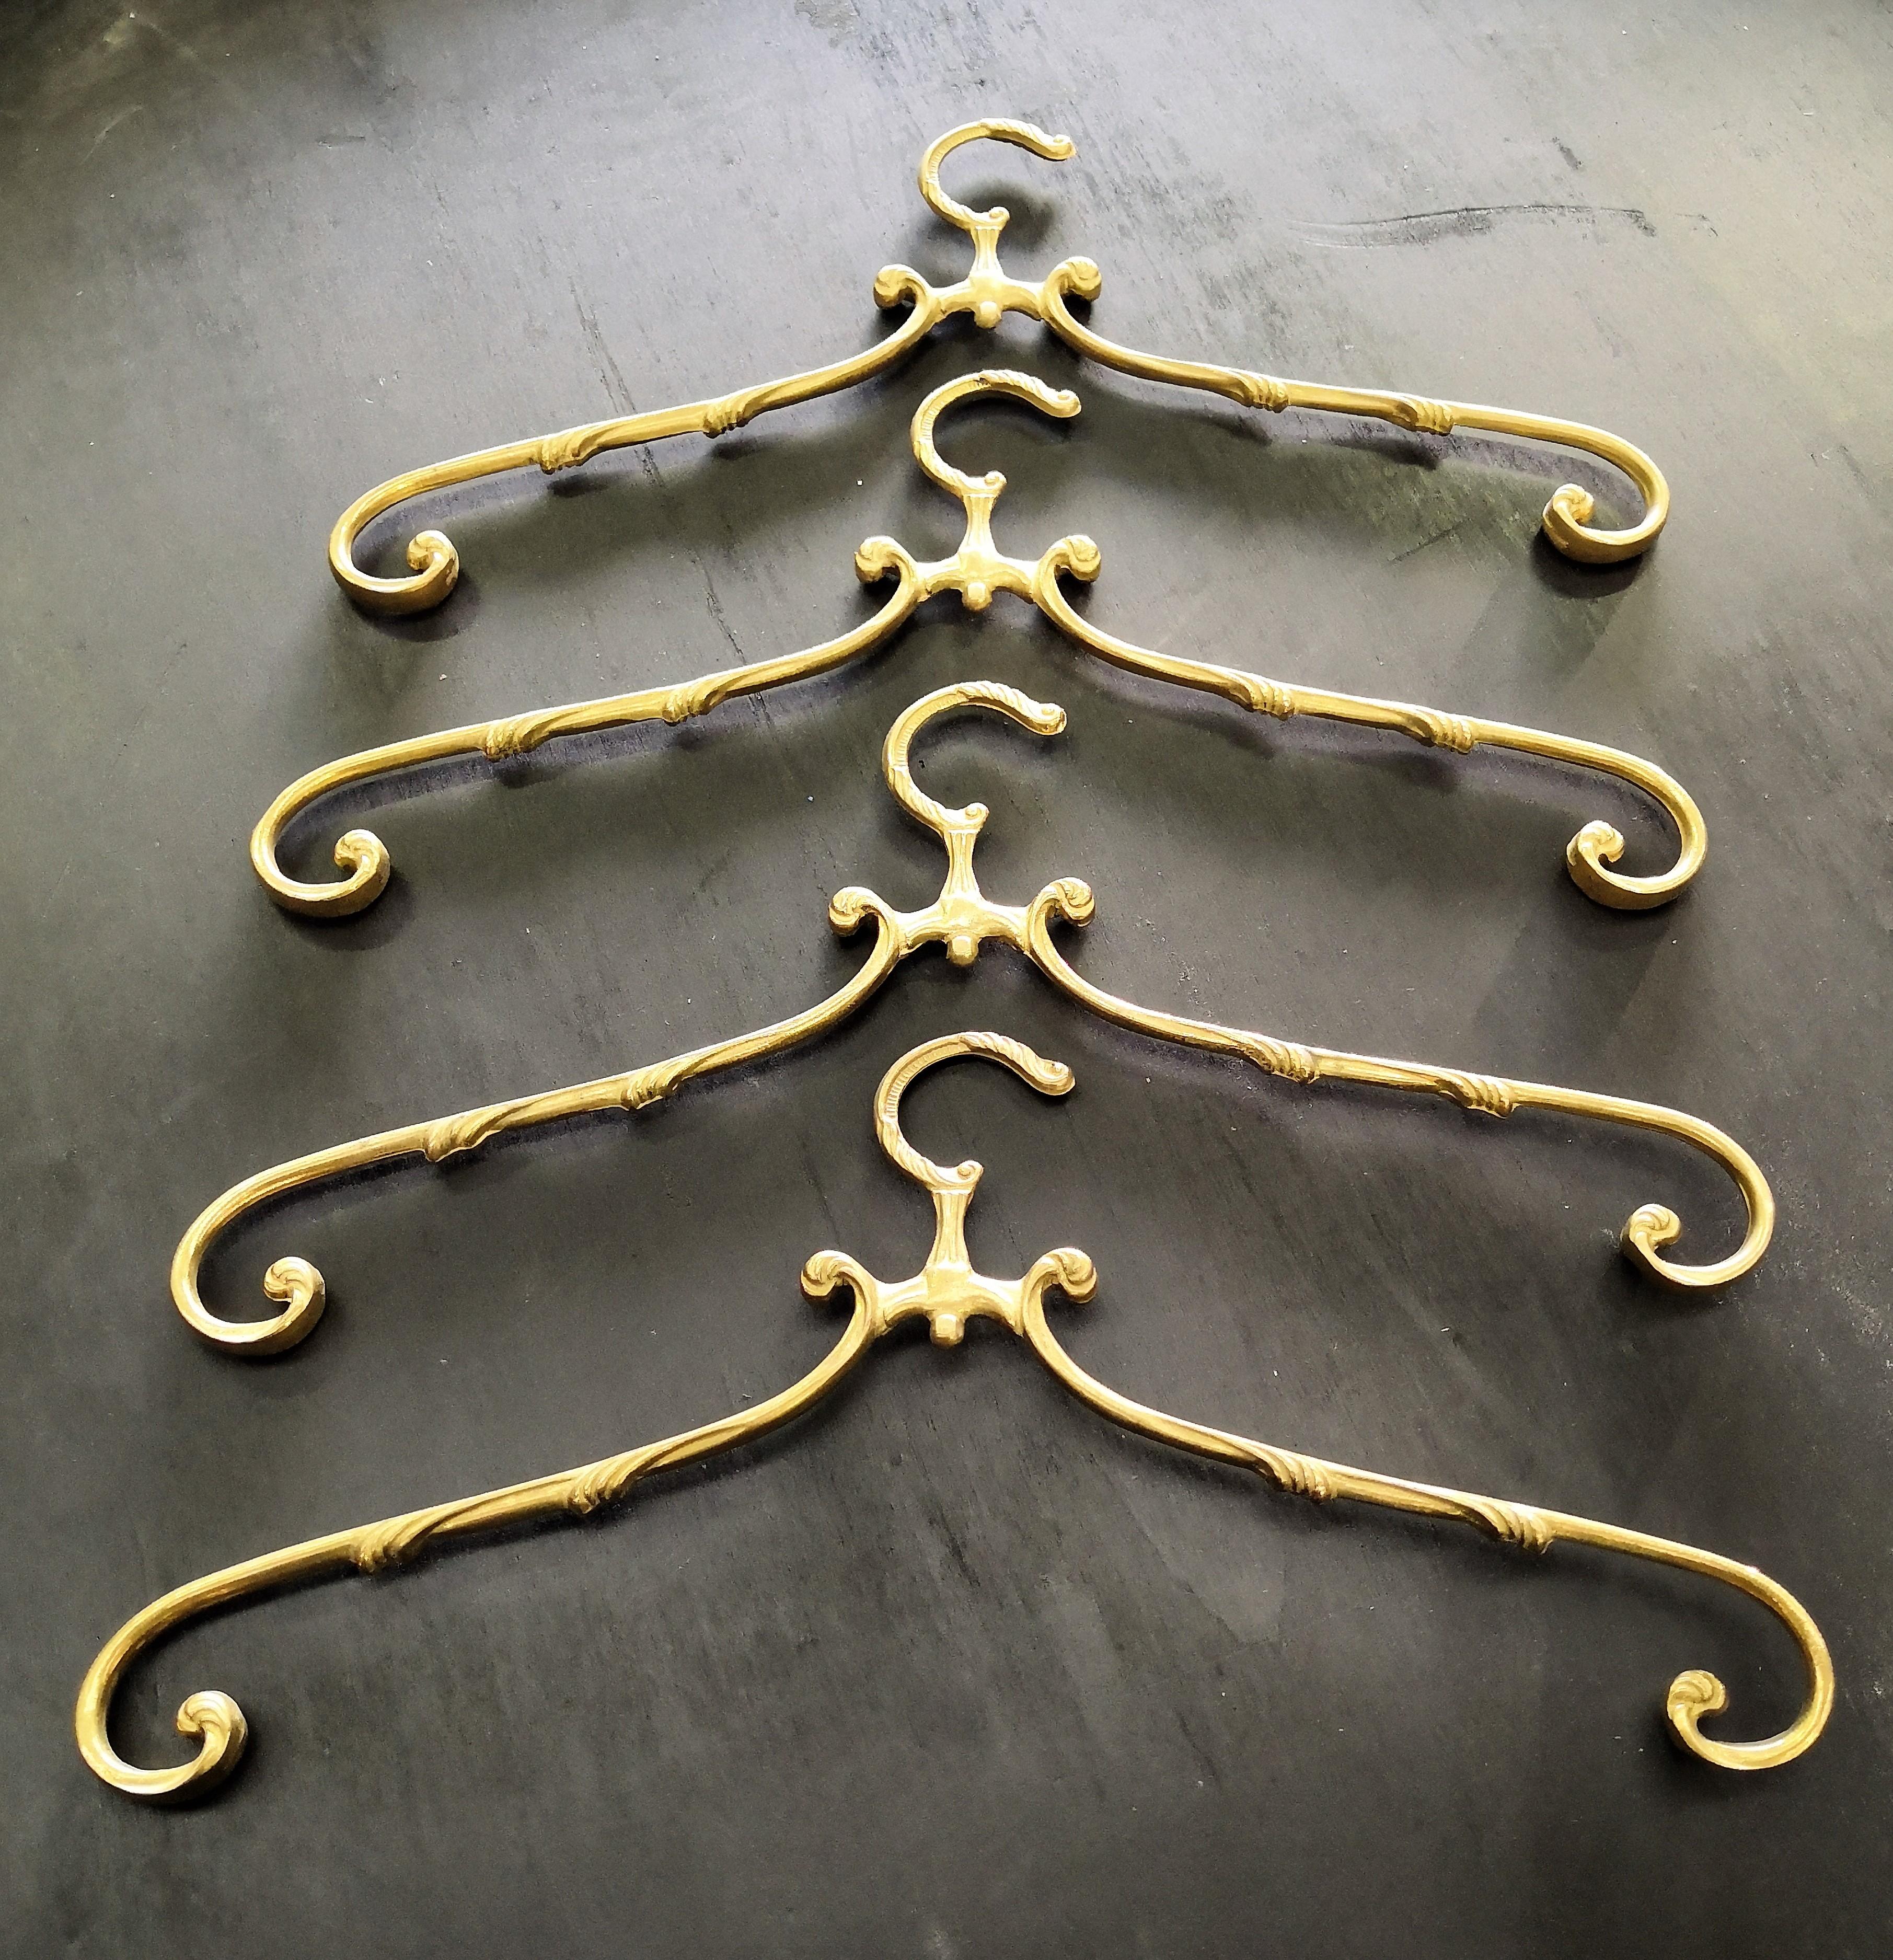 1980s Italian Hollywood Regency neoclassical solid brass coat hangers, large stock available coming from one of Italy's main brass producers of late 20th century, the brass is in excellent conditions, never used with beautiful slight patina of time,